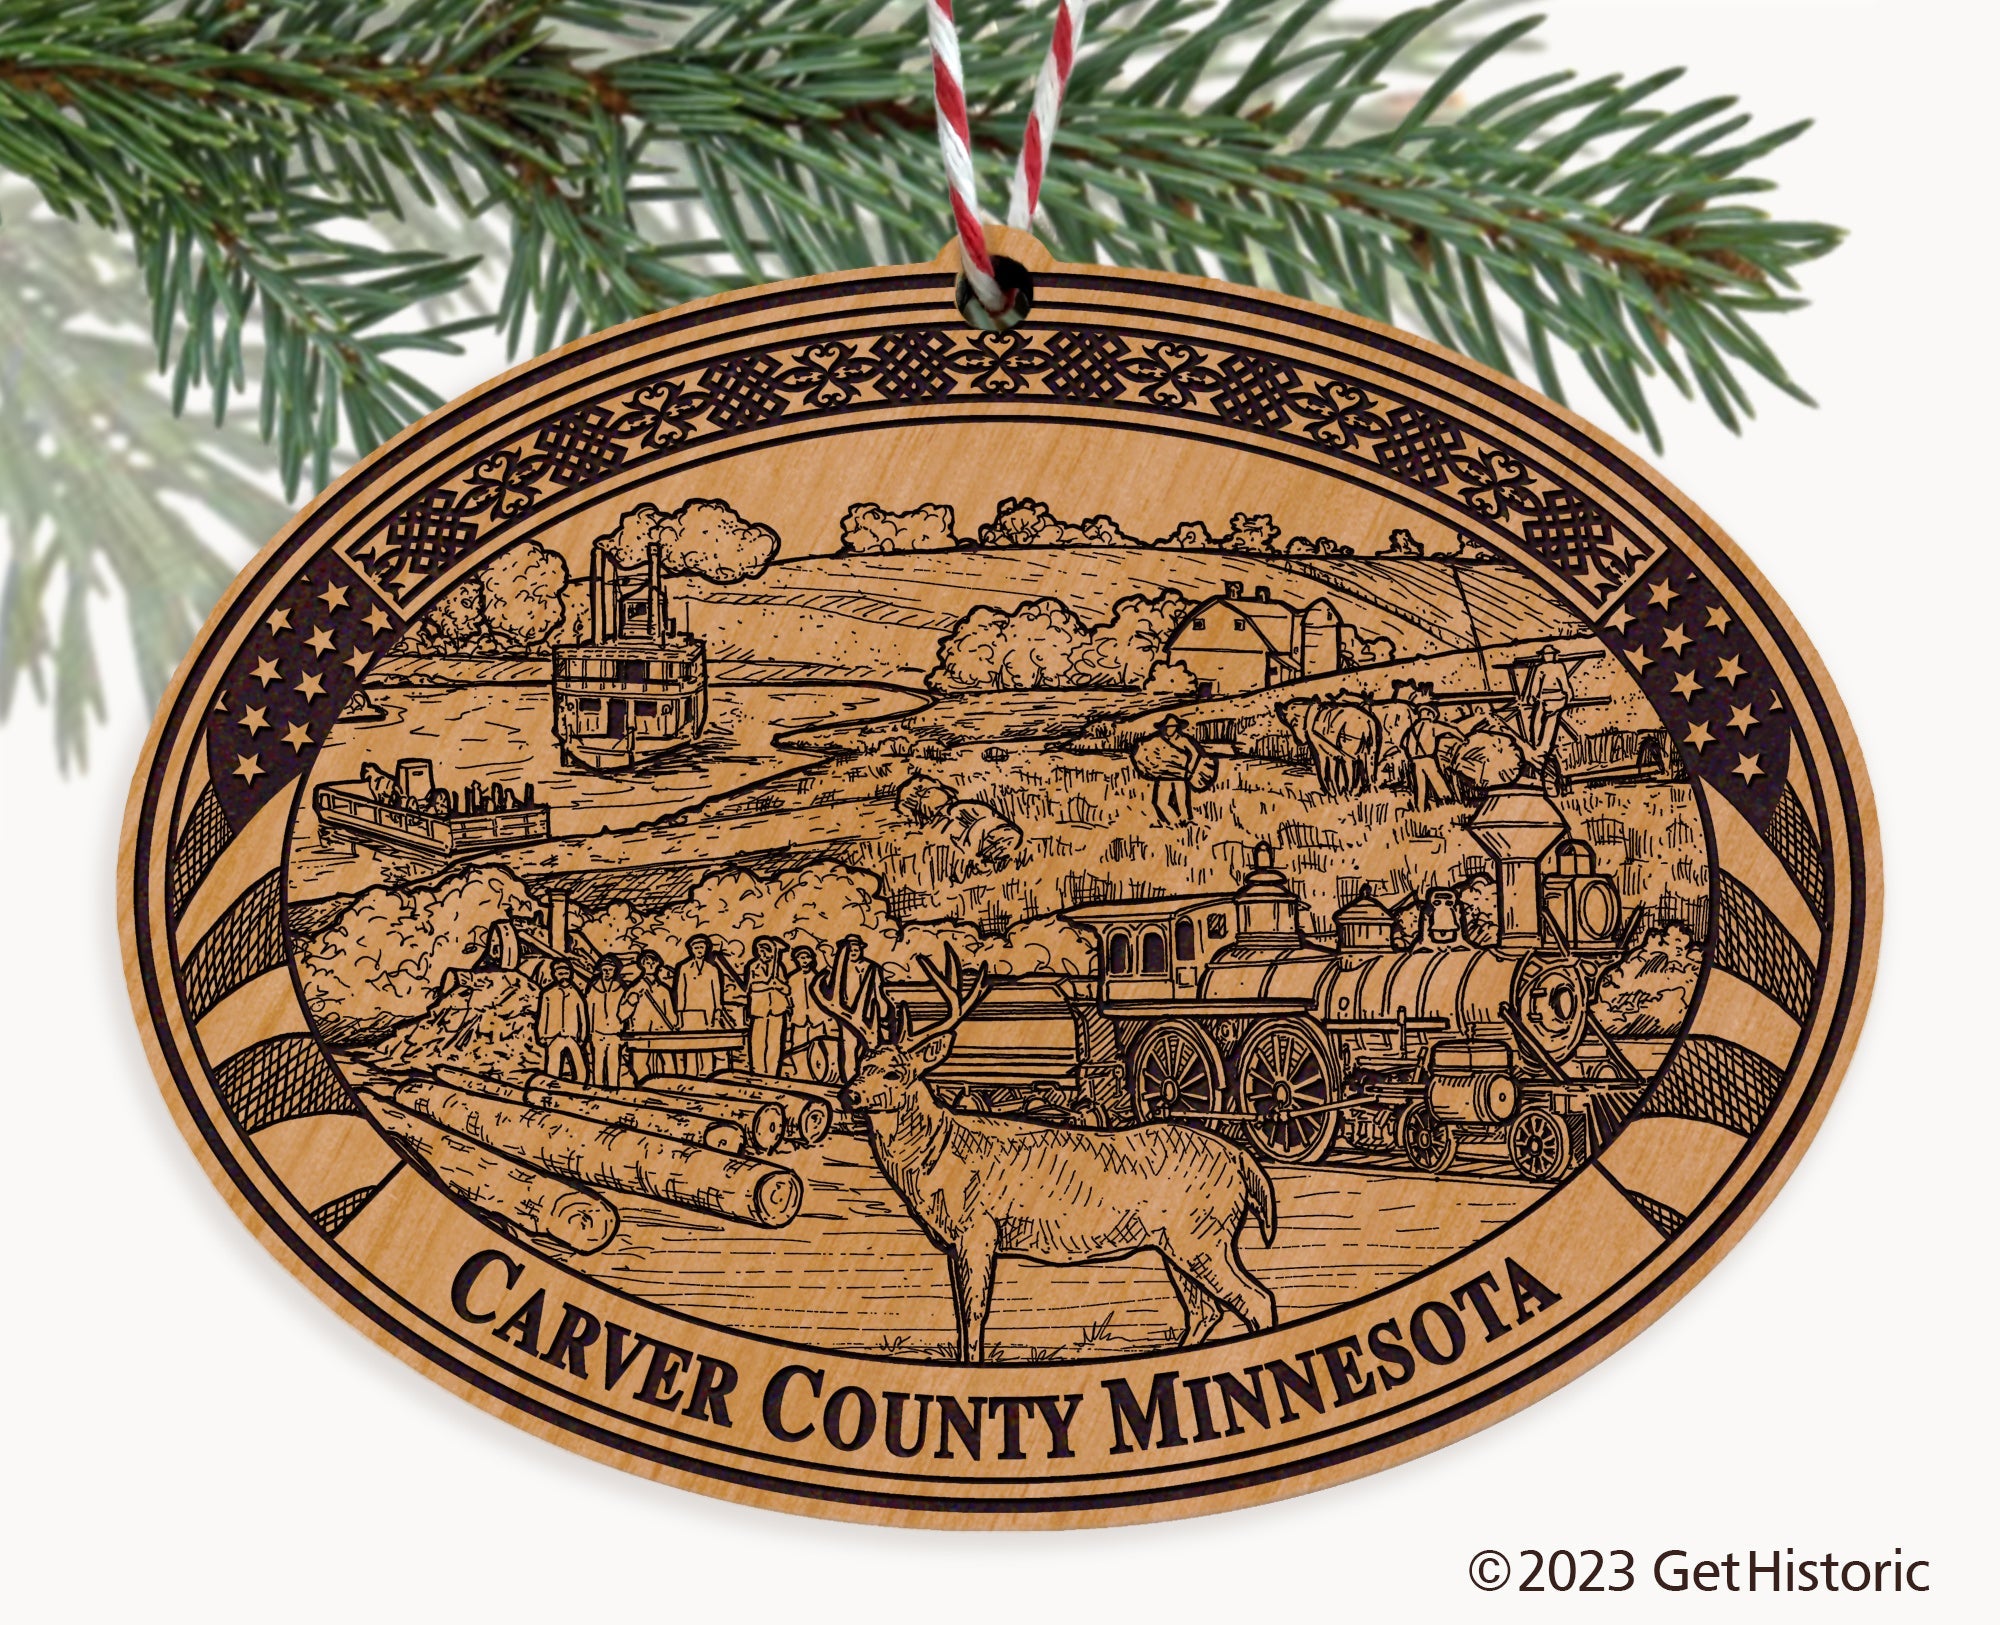 Carver County Minnesota Engraved Natural Ornament